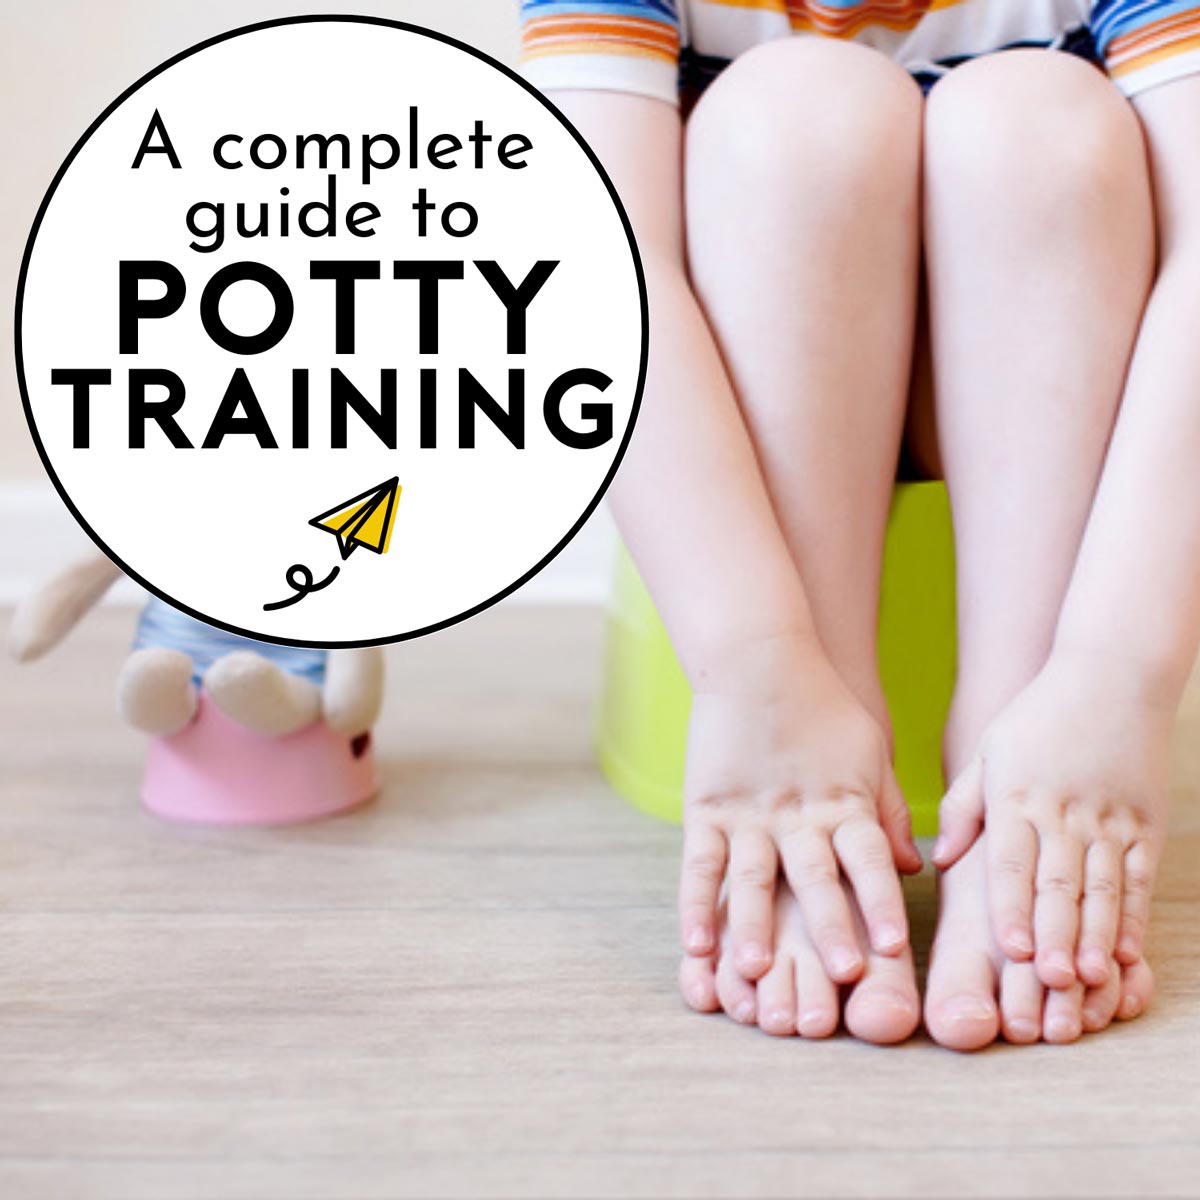 A complete guide to potty training: a child's legs are shown while sitting on a green toddler potty